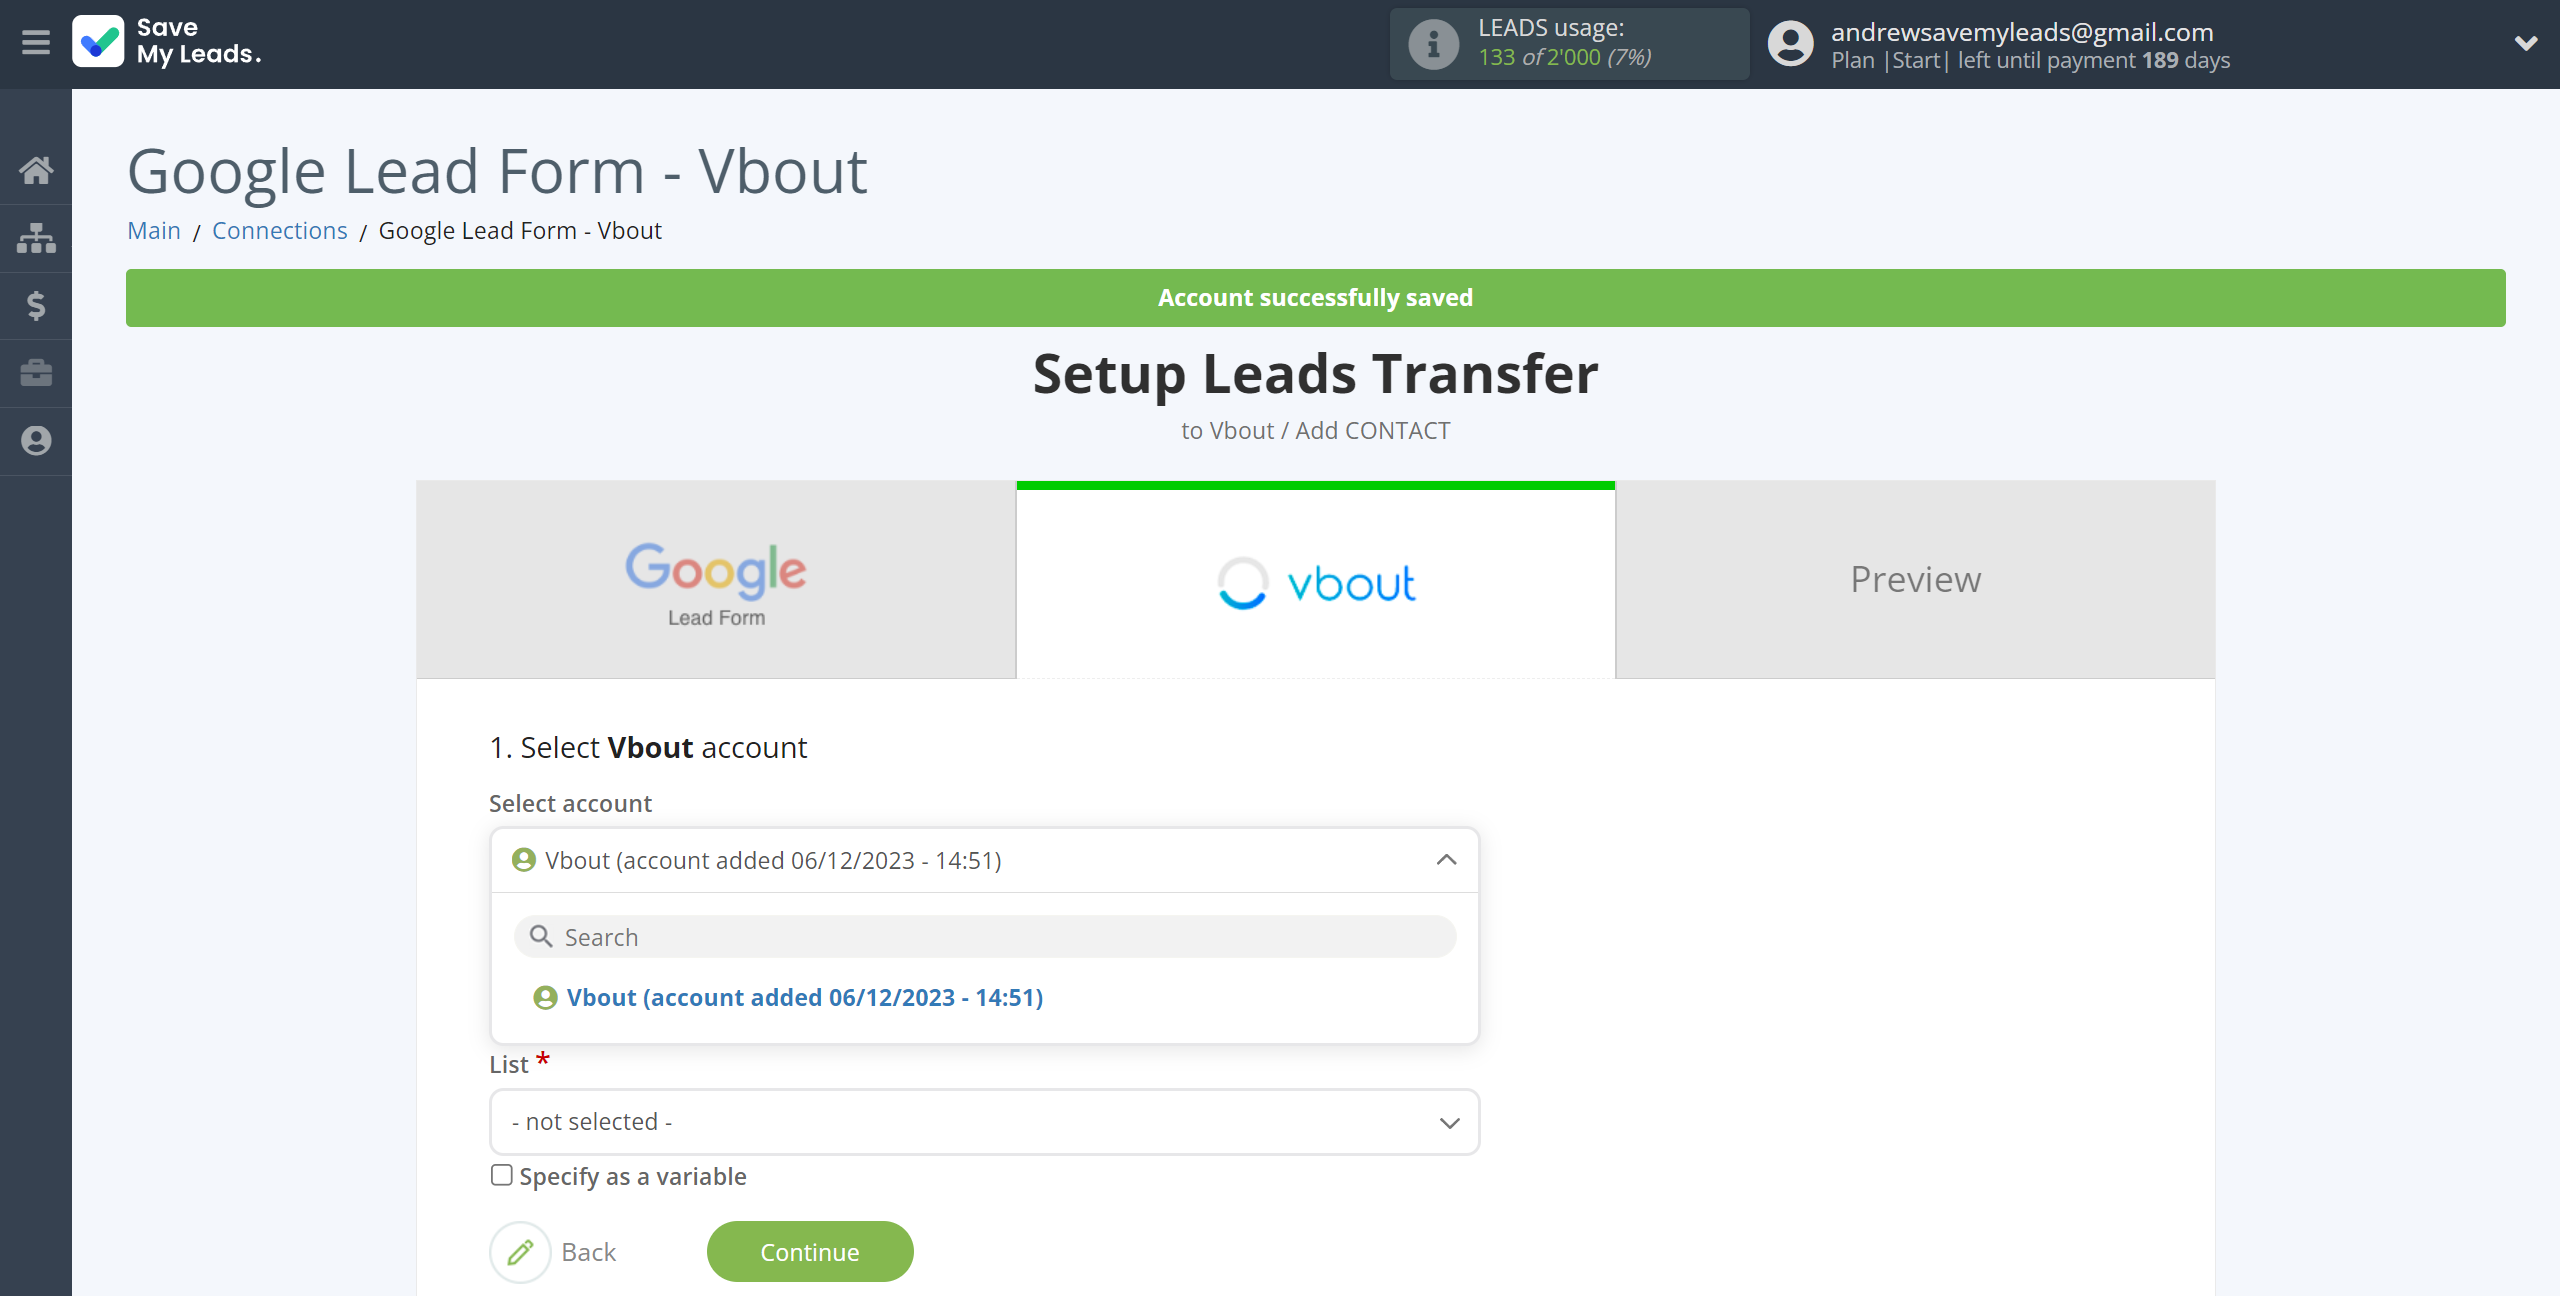 How to Connect Google Lead Form with Vbout Add Contact | Data Destination account selection